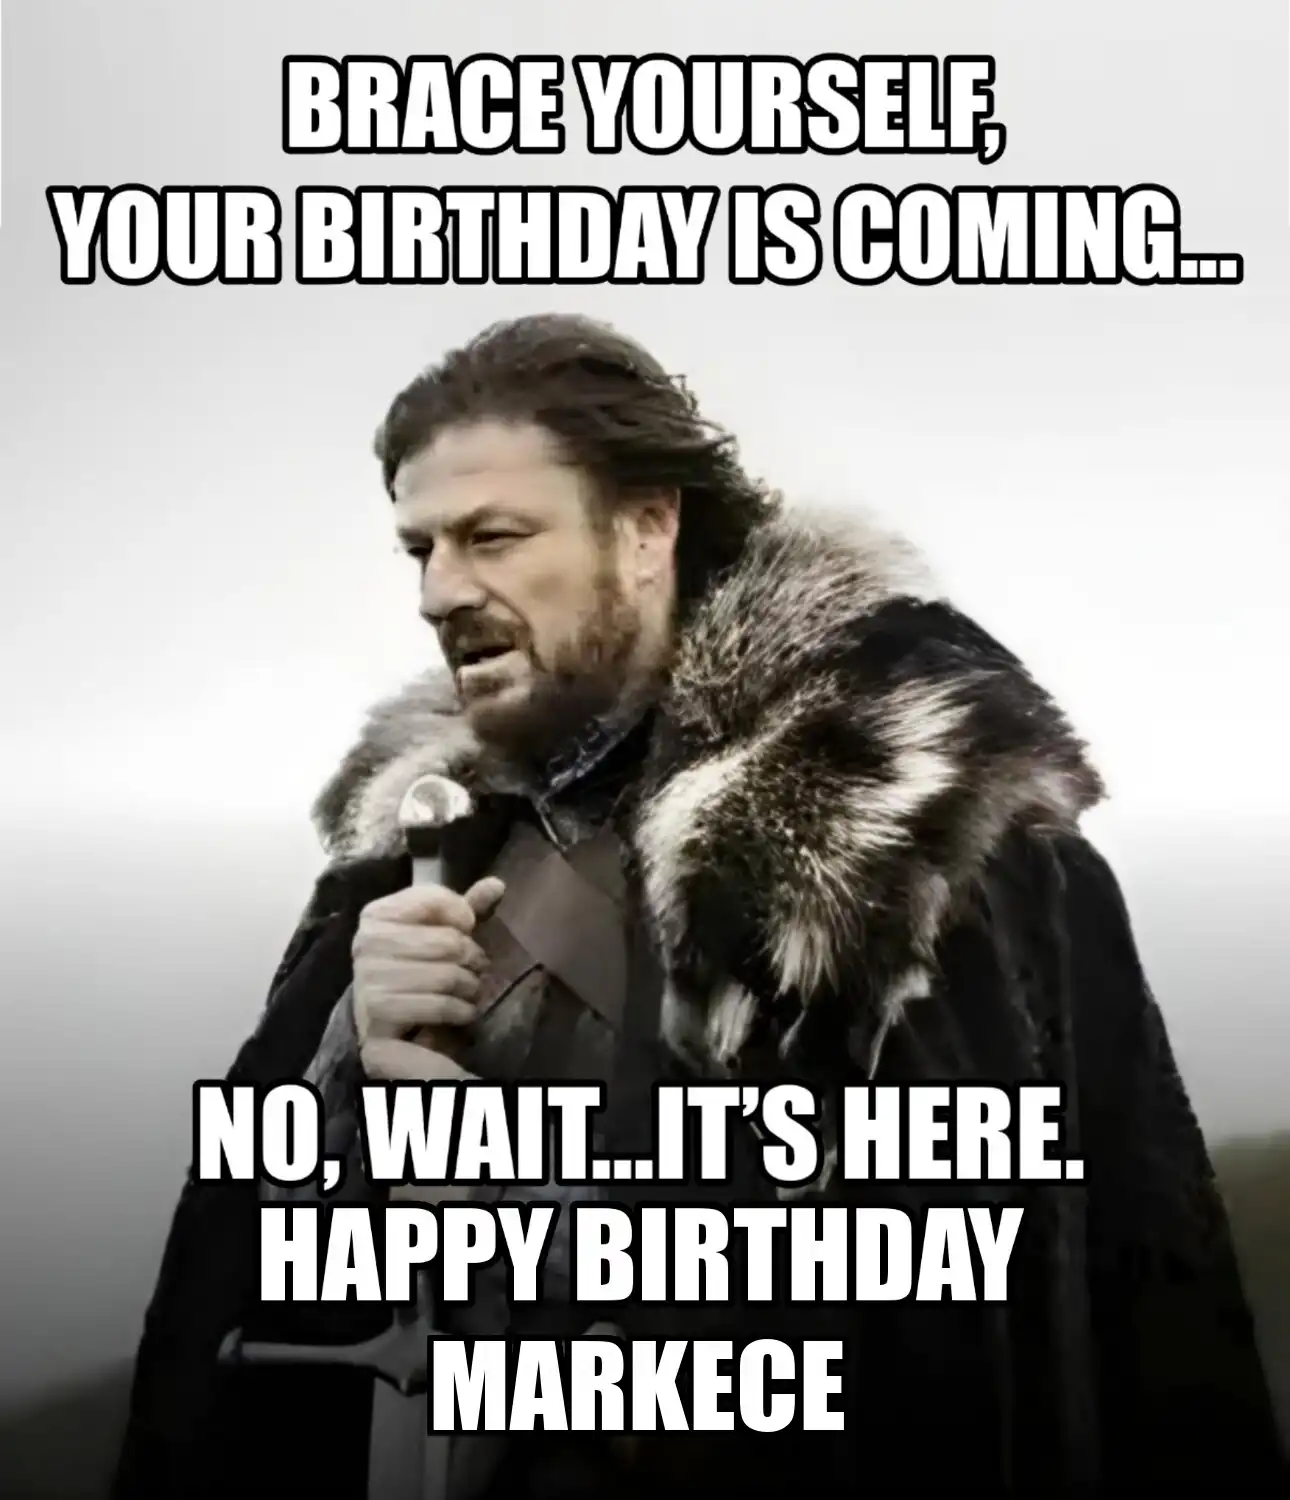 Happy Birthday Markece Brace Yourself Your Birthday Is Coming Meme